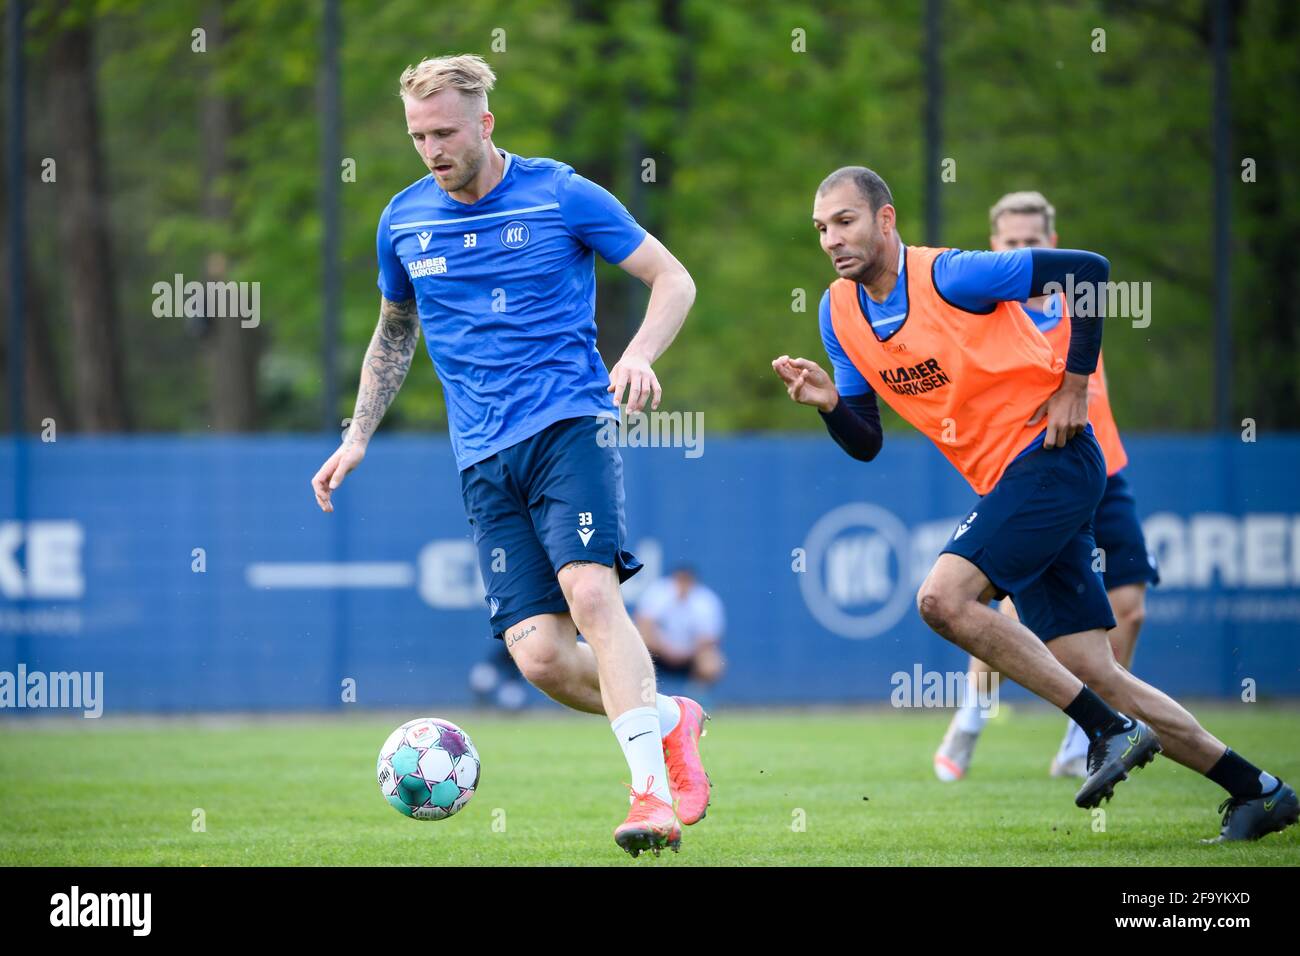 Philipp Hofmann (KSC) in a duels with Daniel Gordon (KSC). GES / Football / 2. Bundesliga: Karlsruher SC - afterwithtags training, April 21, 2021 Football / Soccer: 2. Bundesliga: KSC Training, Karlsruhe, April 21, 2021 | usage worldwide Stock Photo